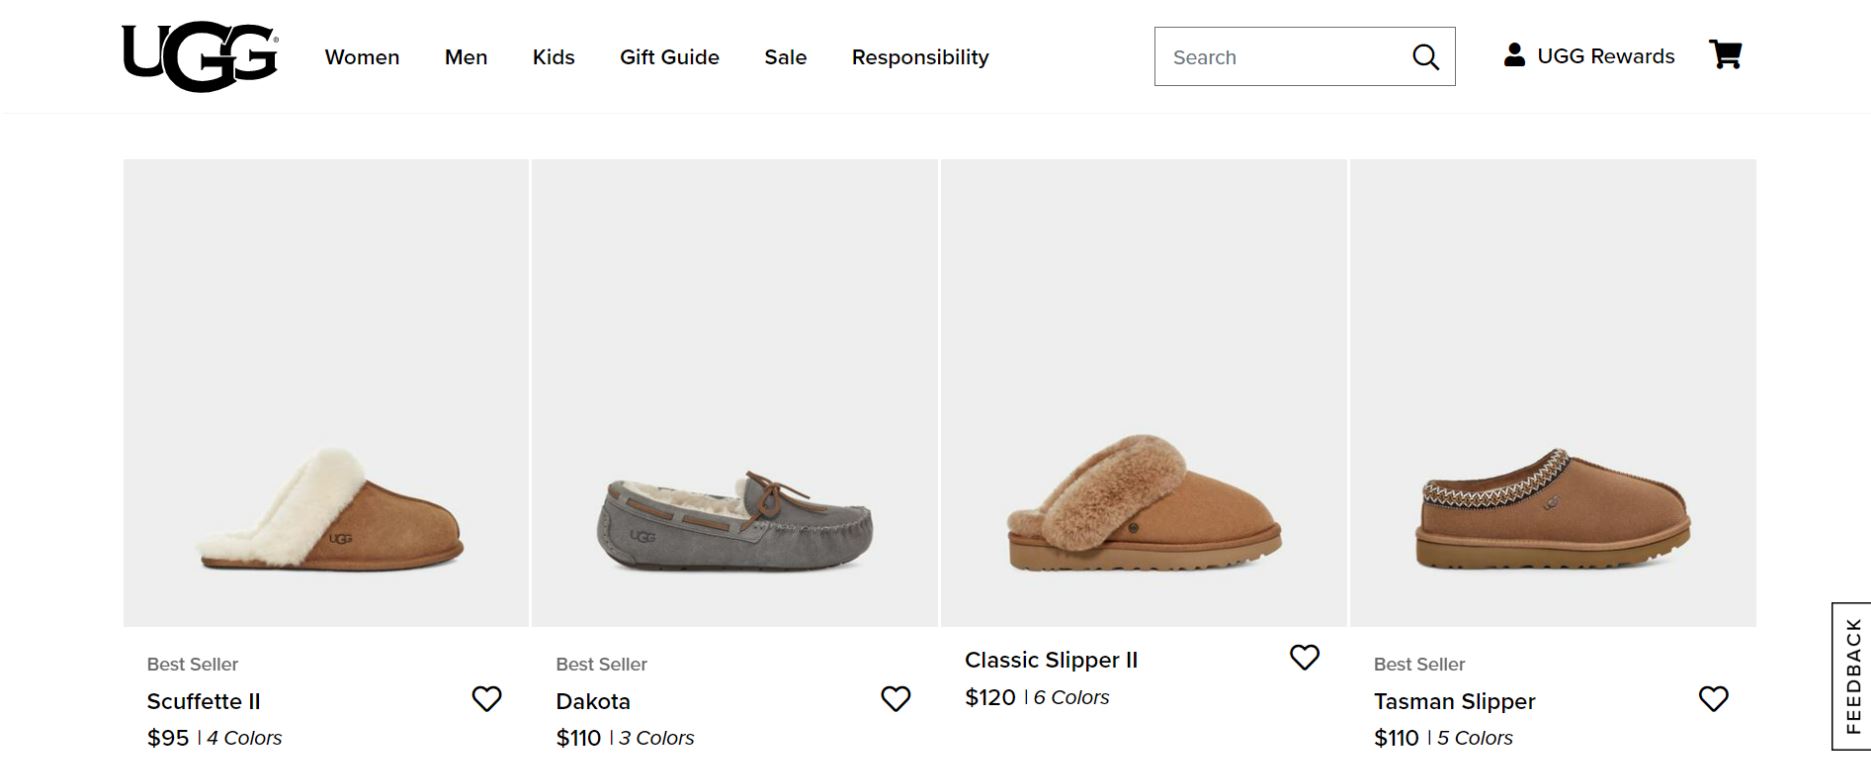 Ugg slippers for women. Photo screenshotted from Ugg’s official website